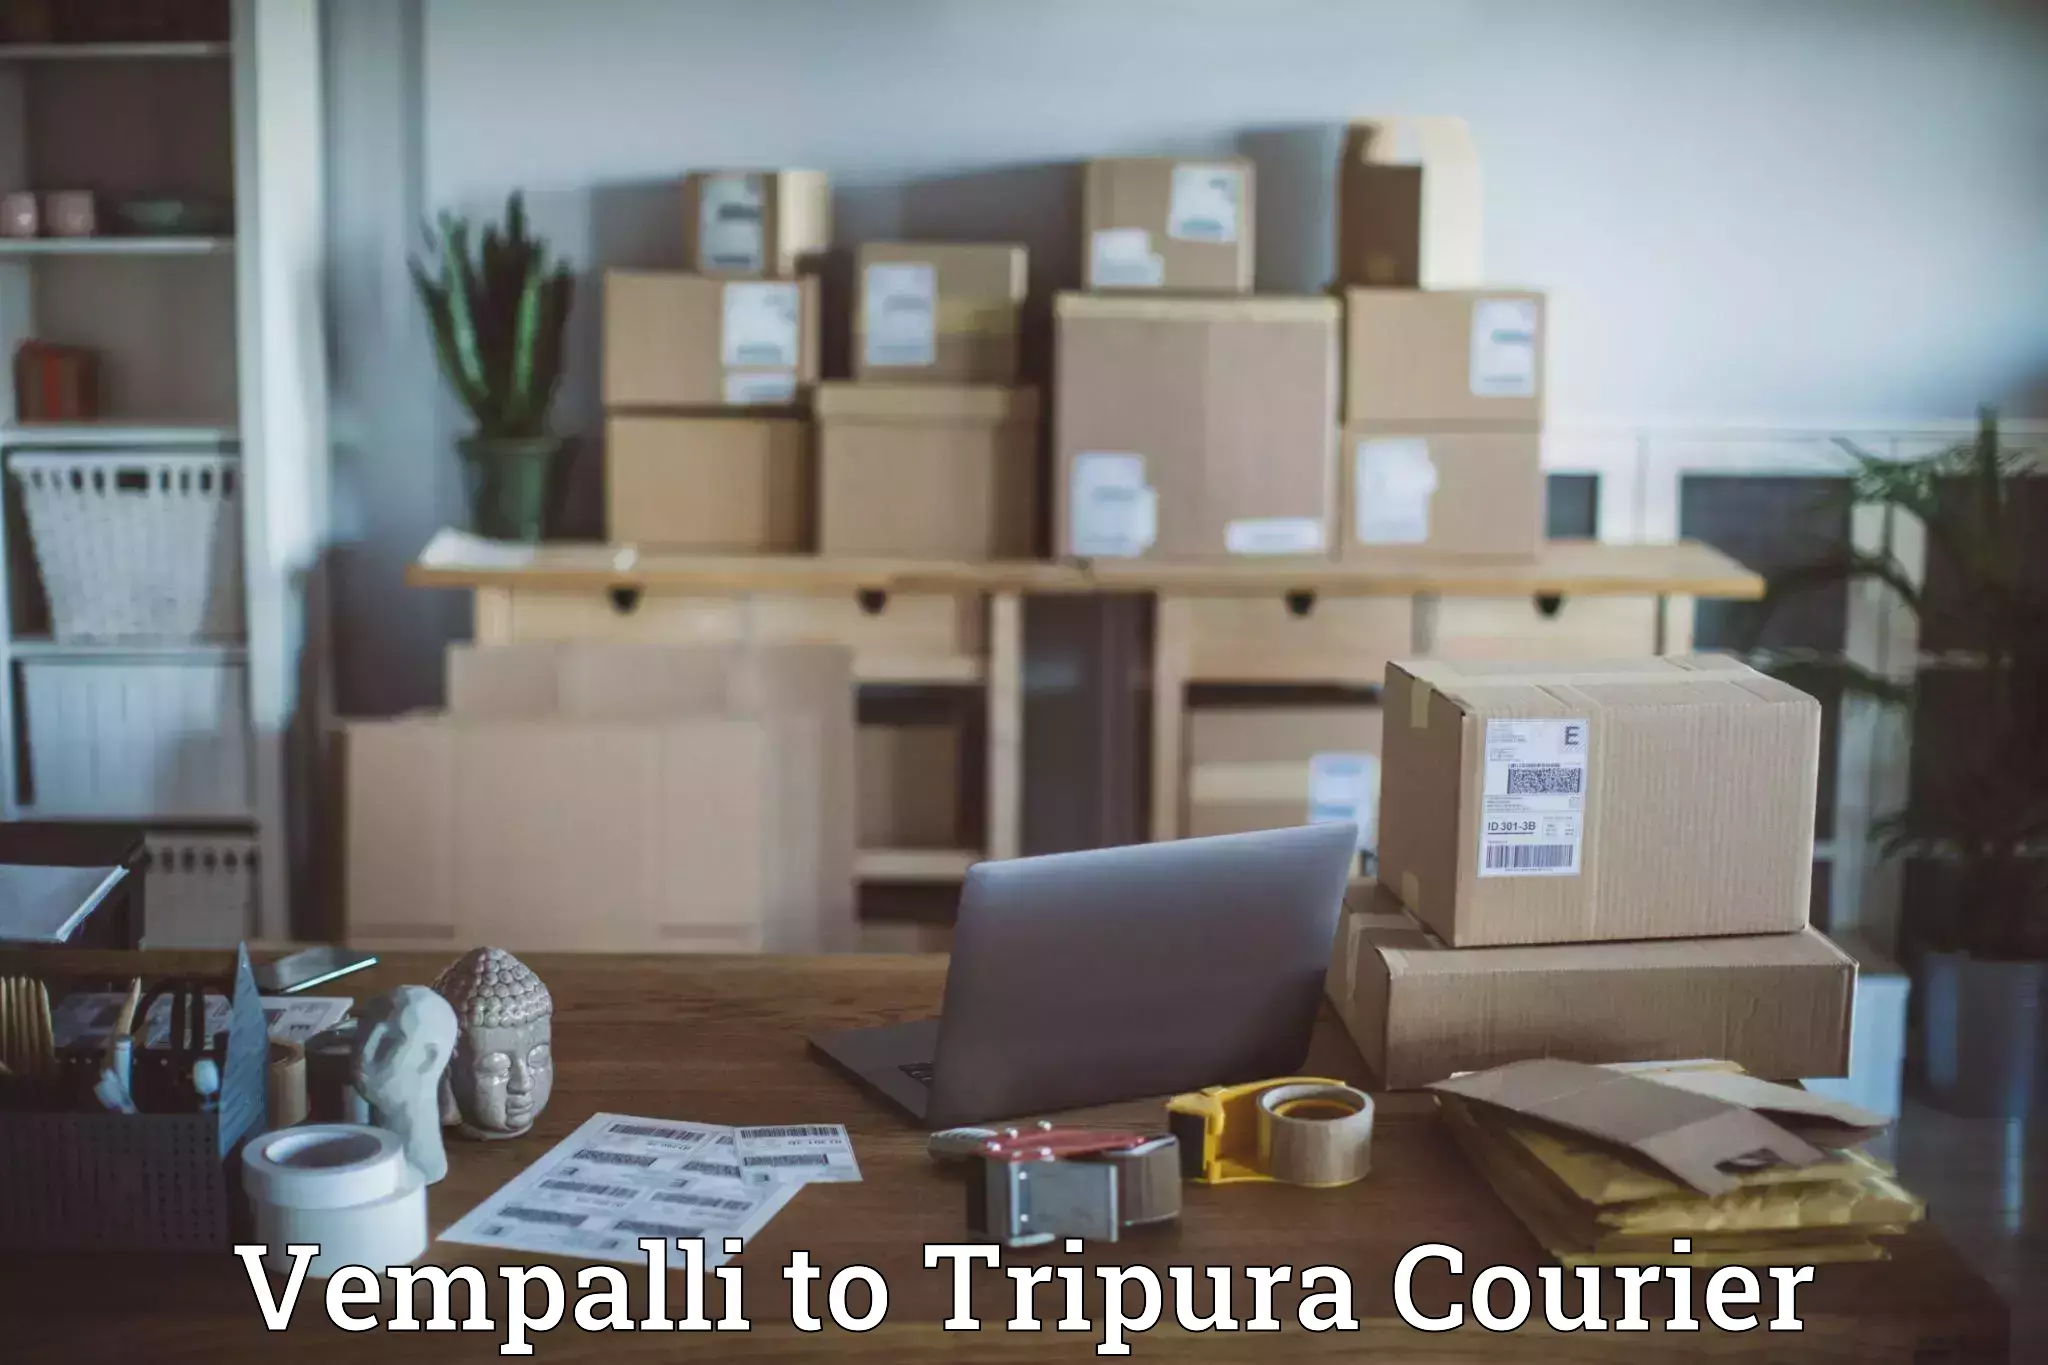 Multi-service courier options in Vempalli to Udaipur Tripura